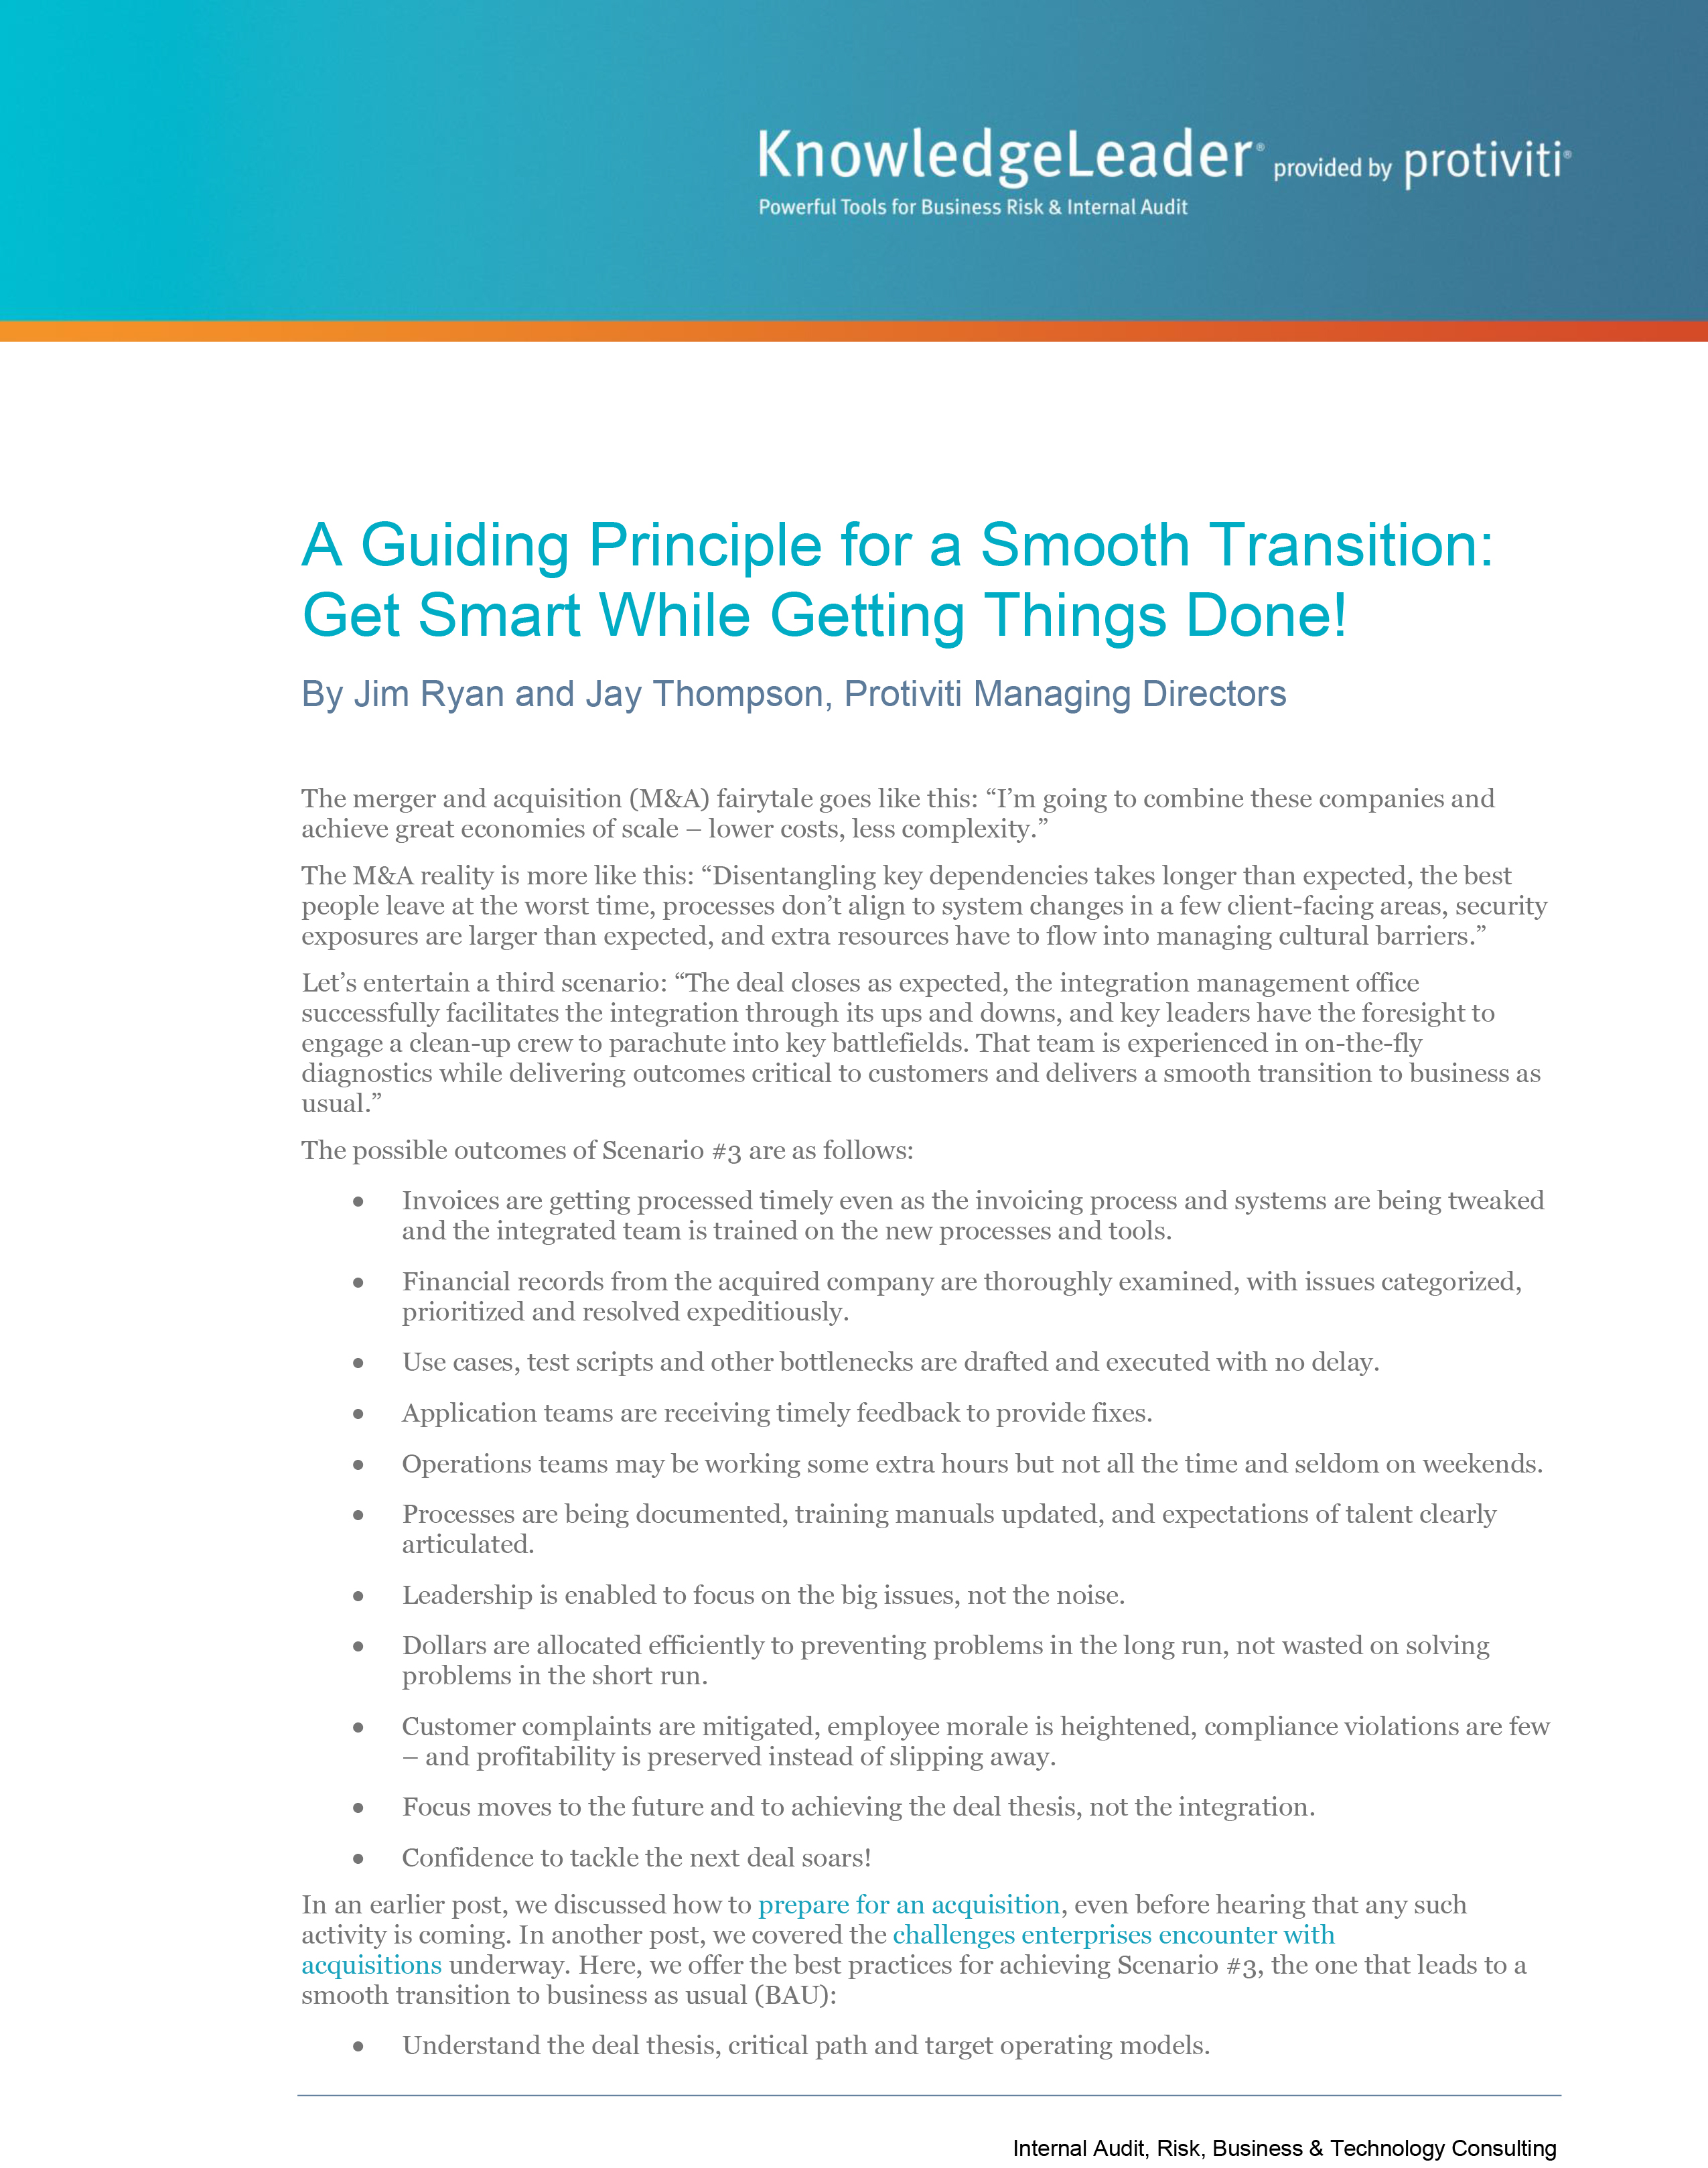 Screenshot of the first page of A Guiding Principle for a Smooth Transition-Get Smart While Getting Things Done